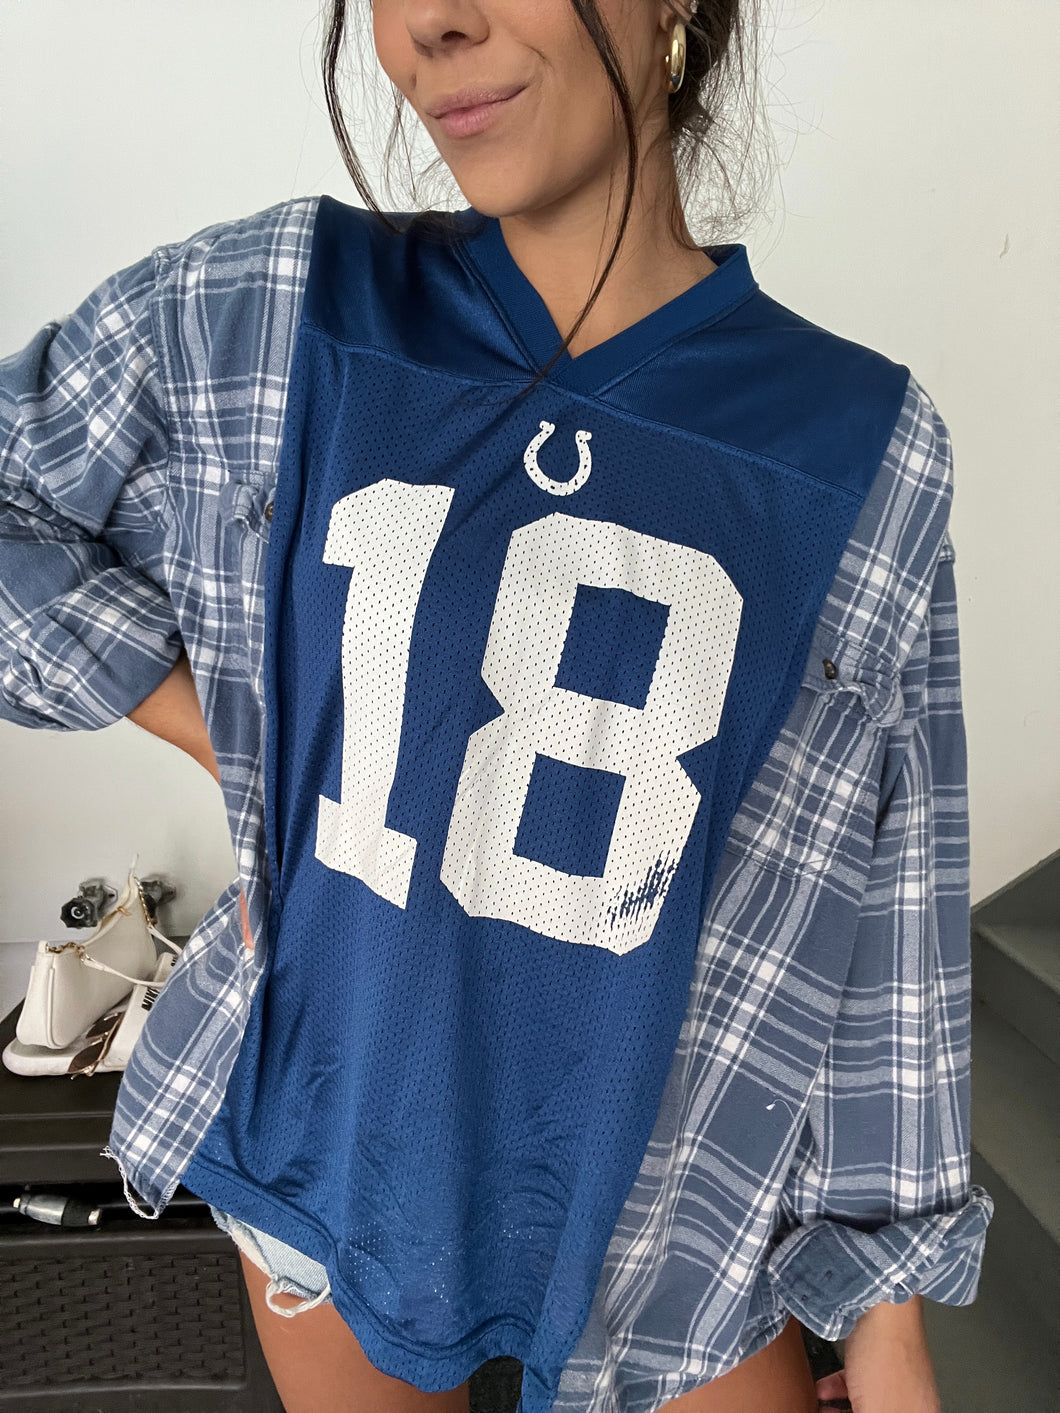 #18 MANNING COLTS JERSEY X FLANNEL